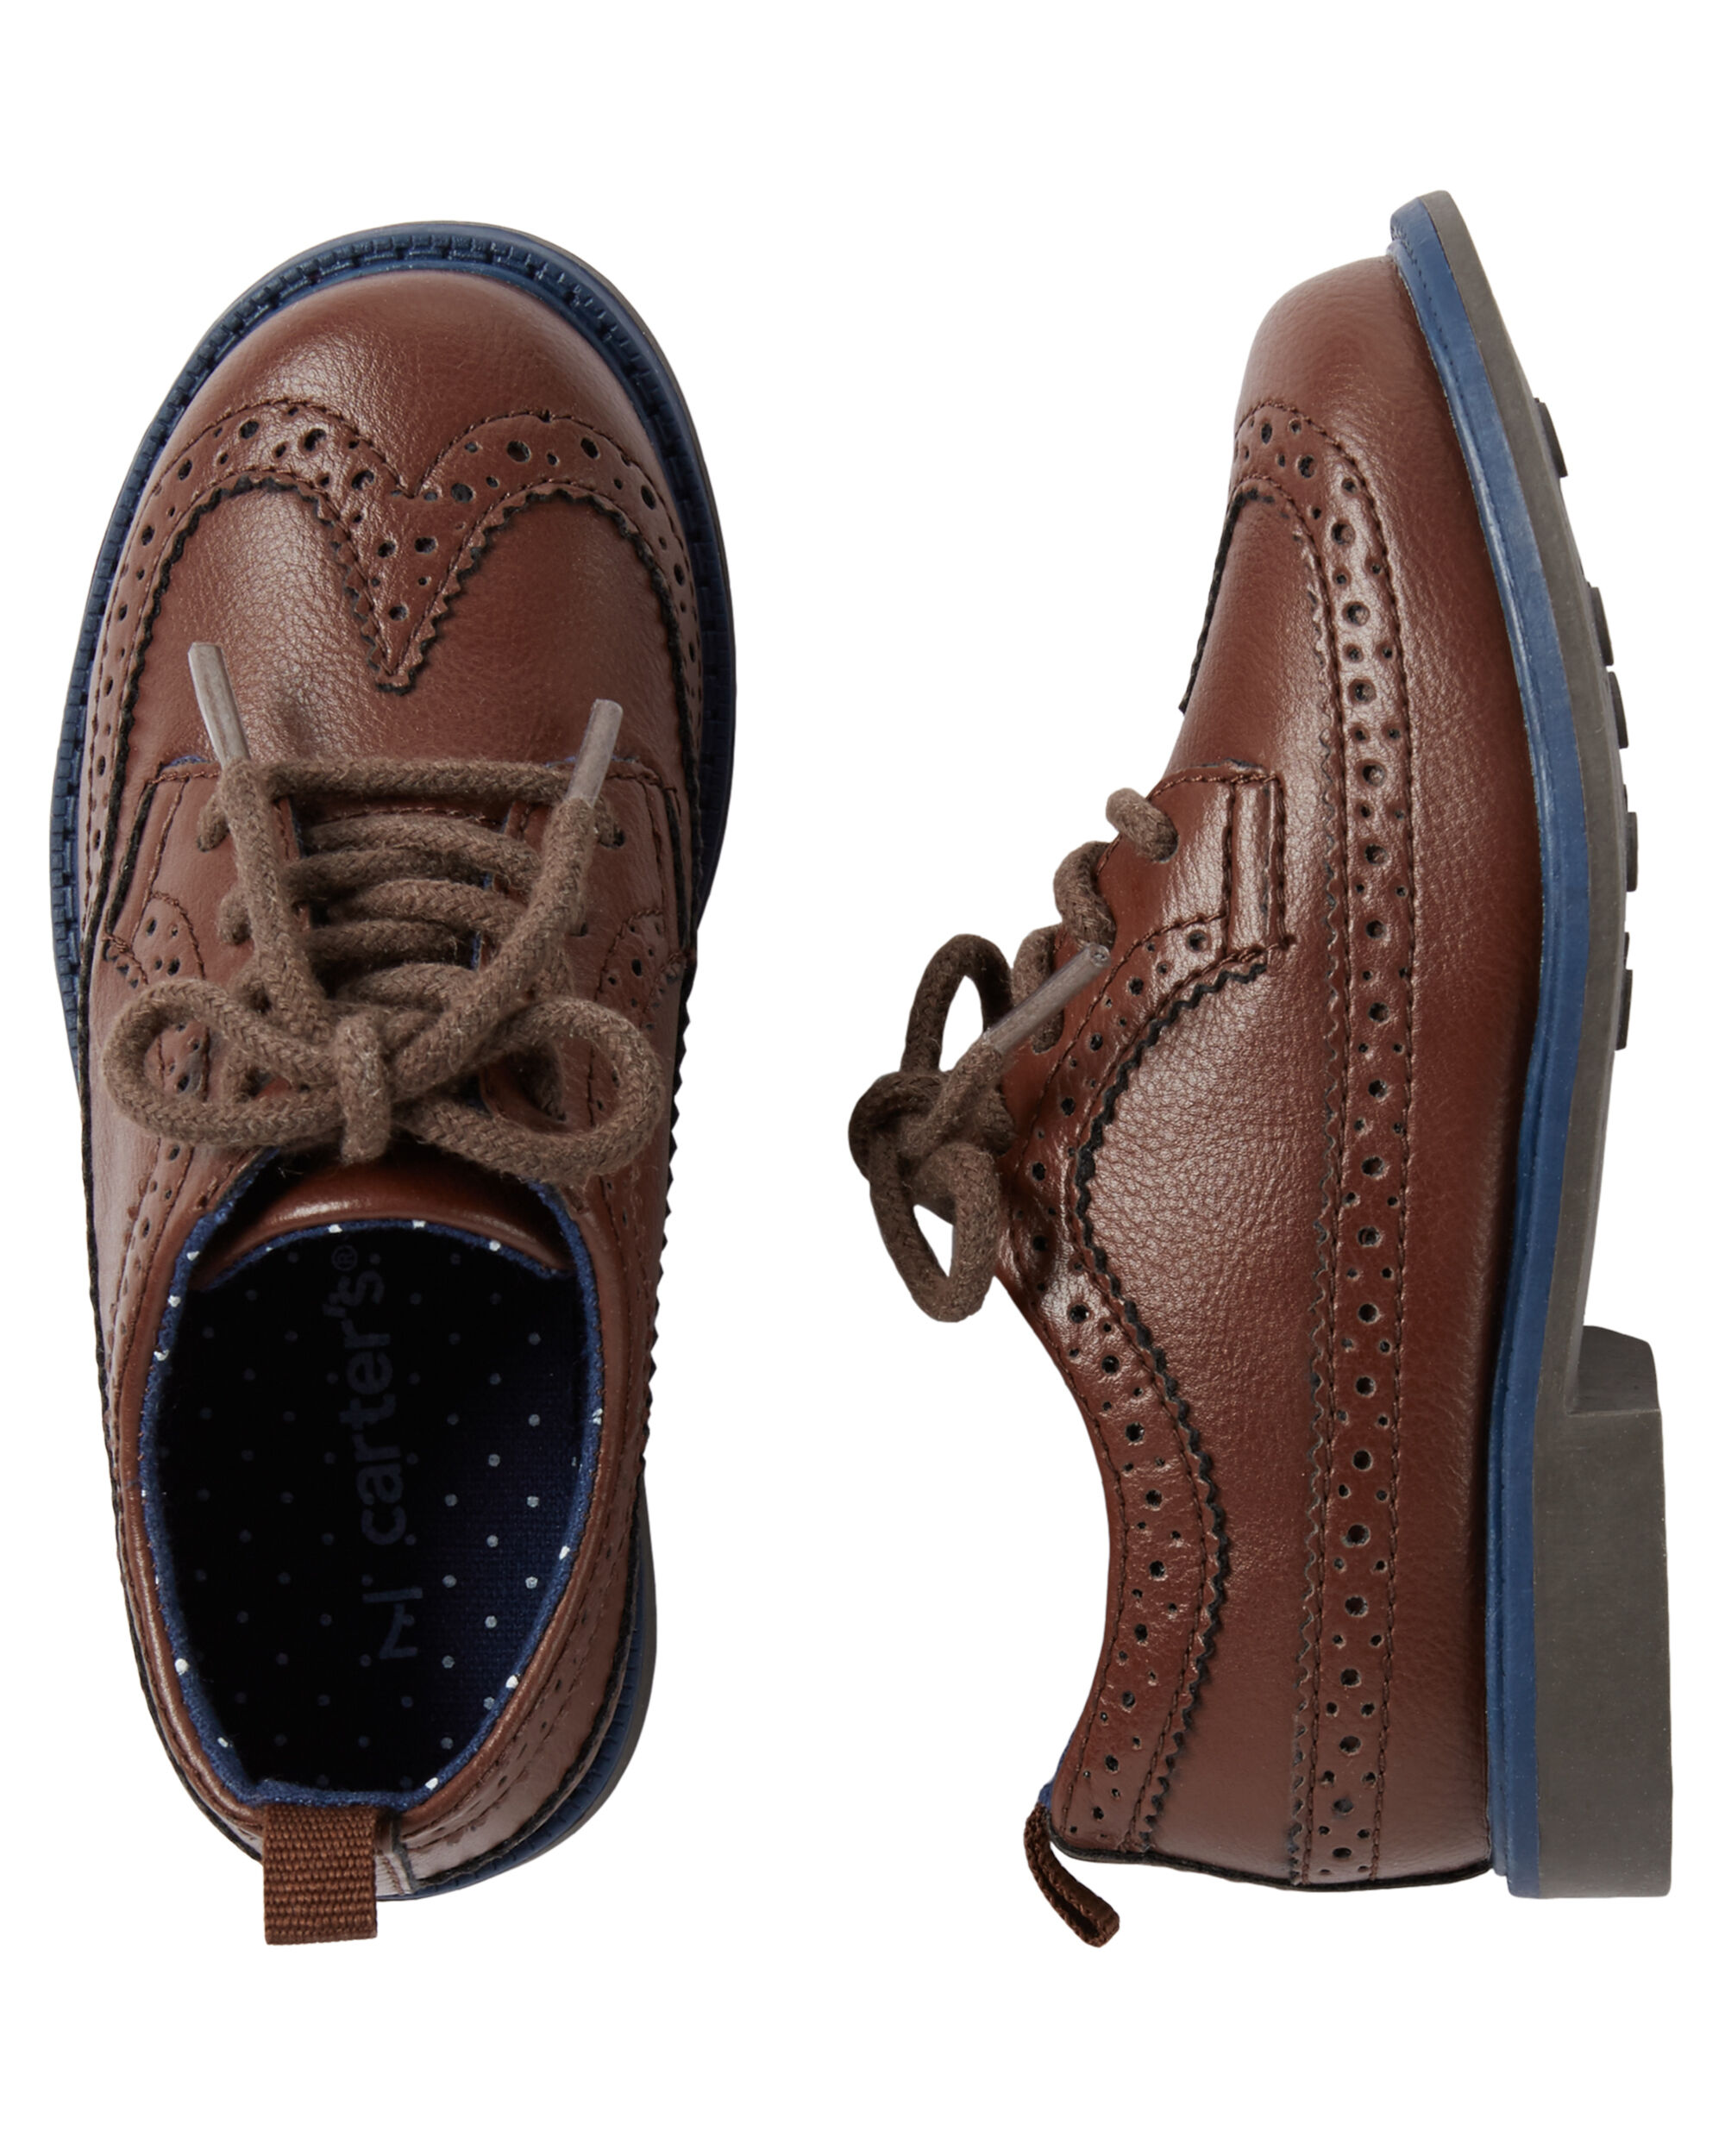 oxfords for toddlers